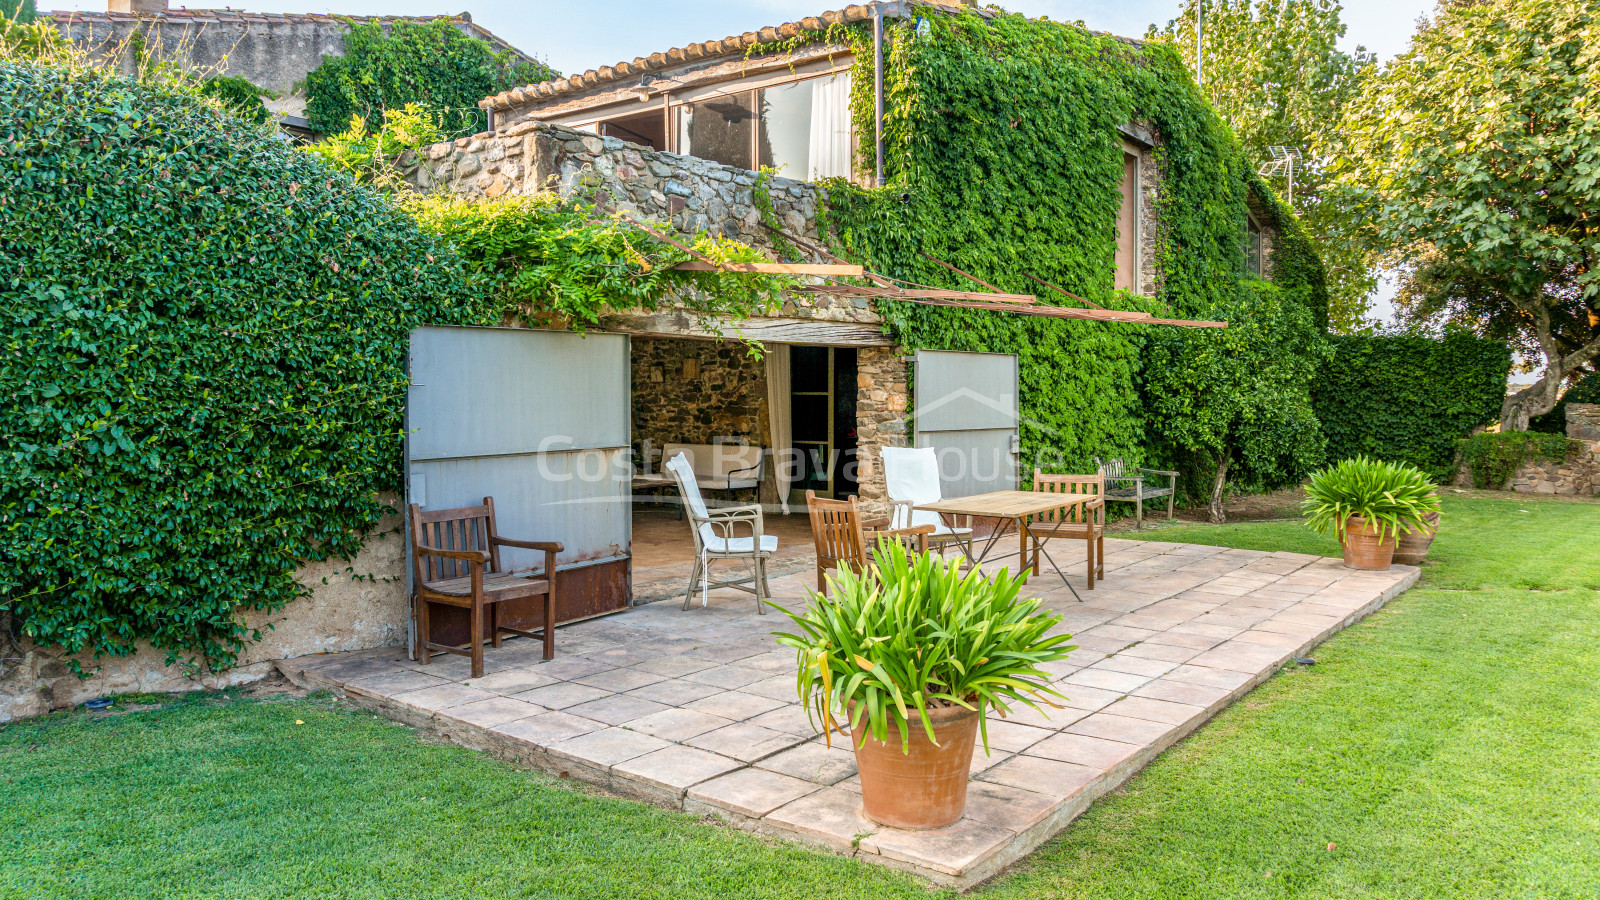 Renovated Catalan masia for sale in Cruilles with 12.000 m² of land and lovely garden with pool